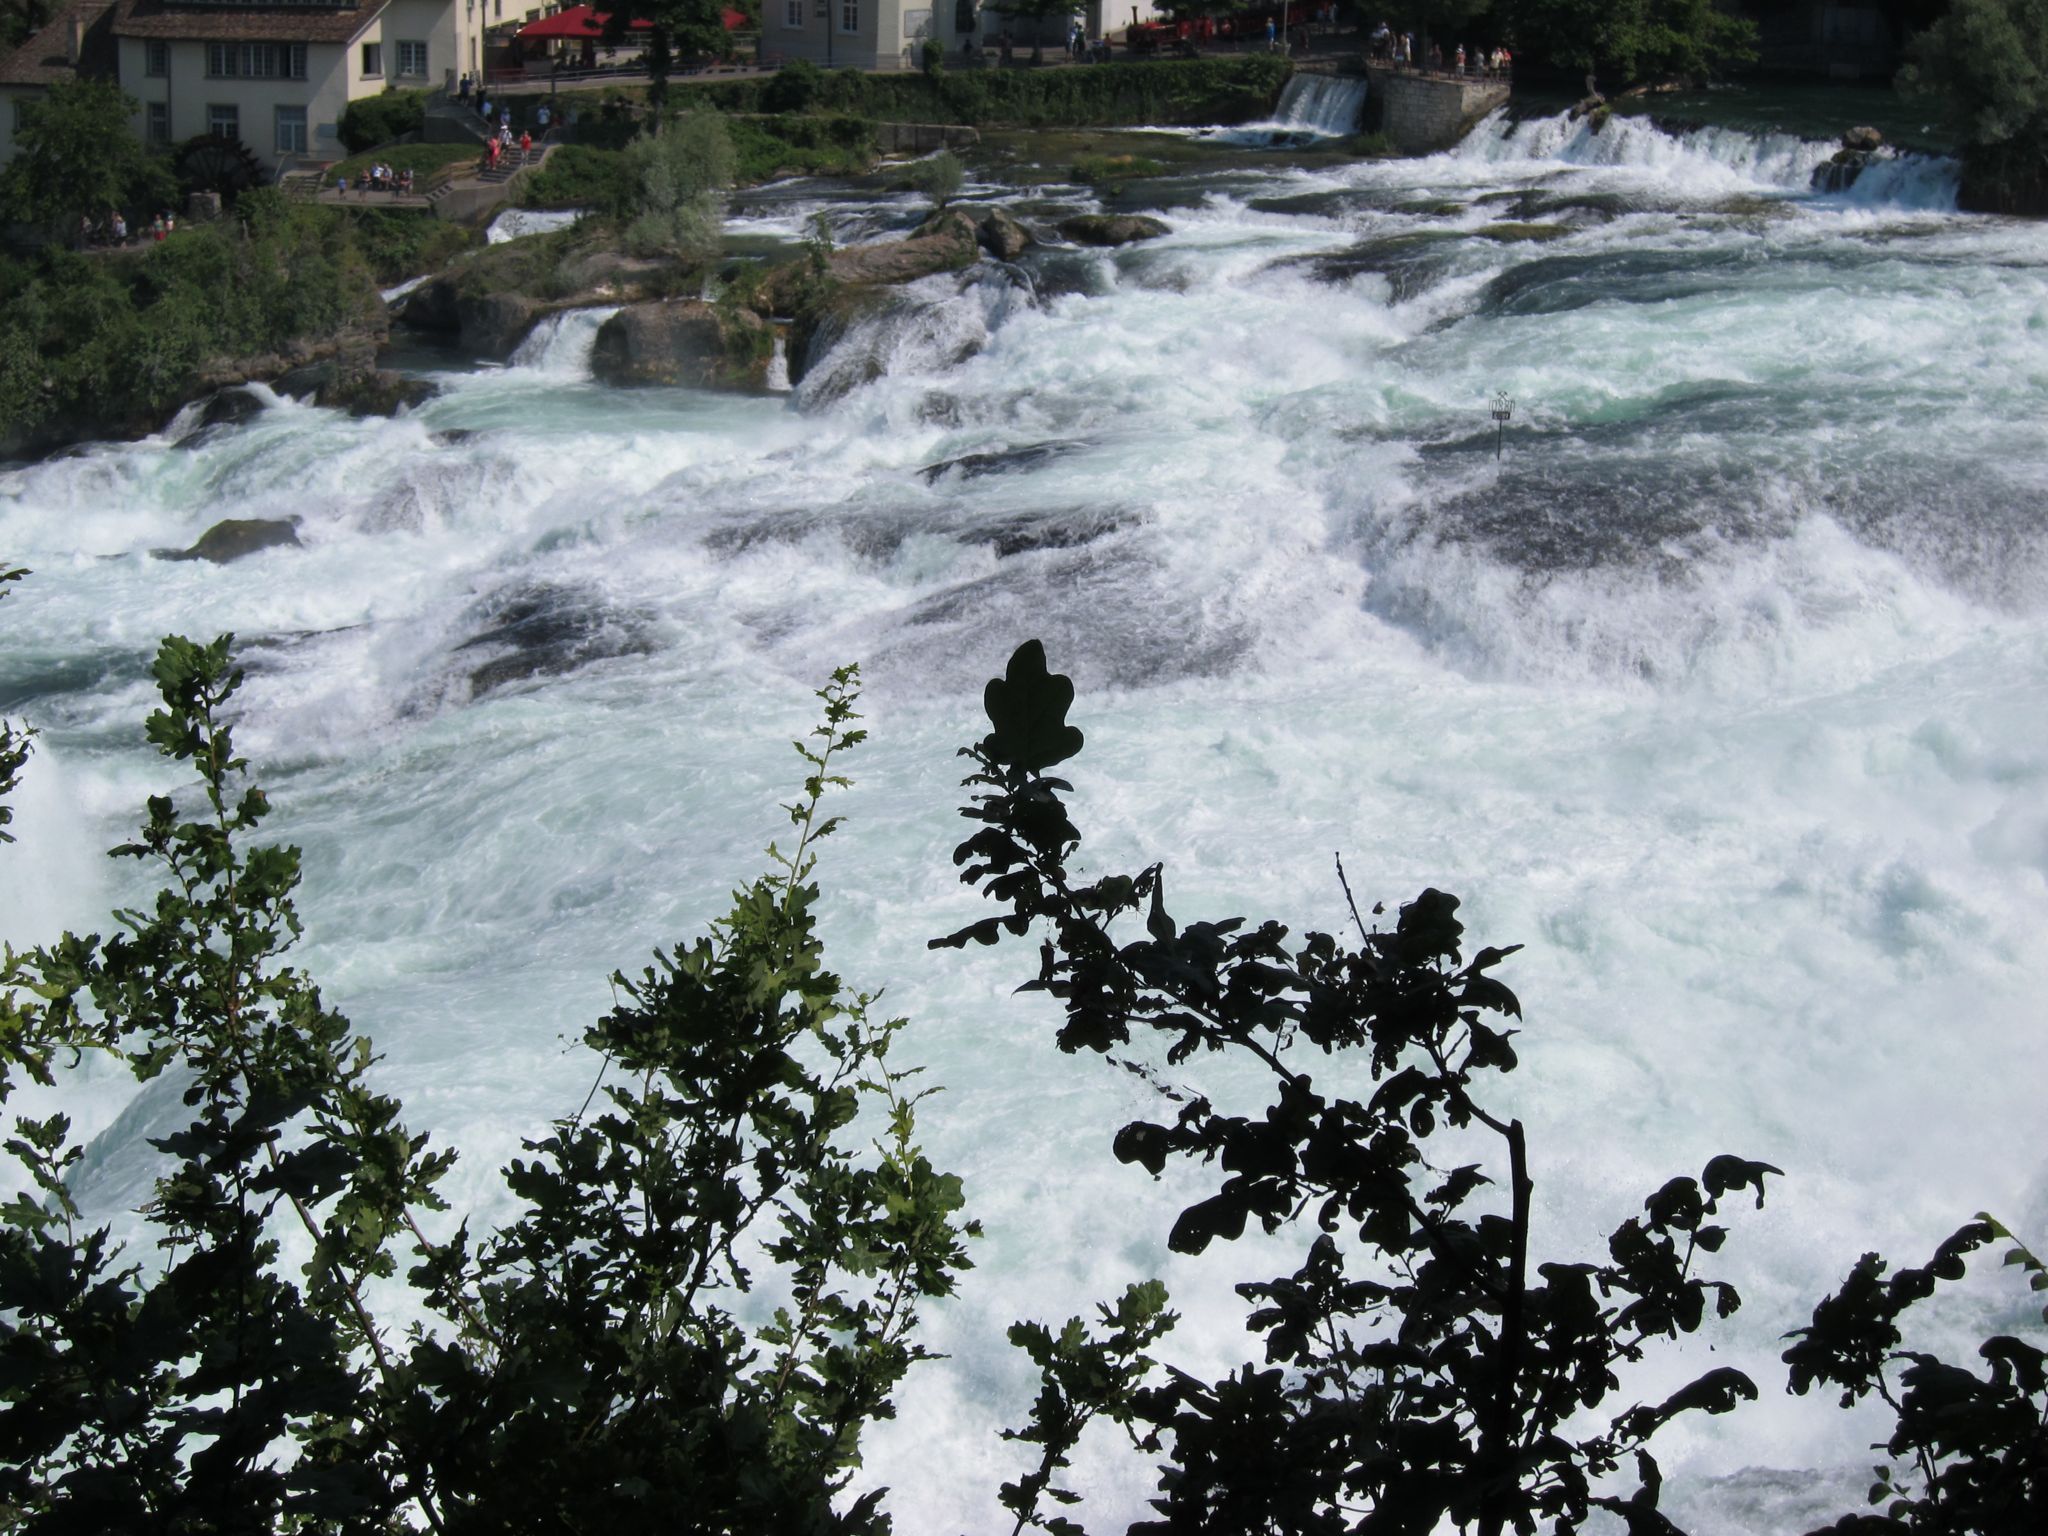 Photo 2 of 22 from the album Rheinfall.